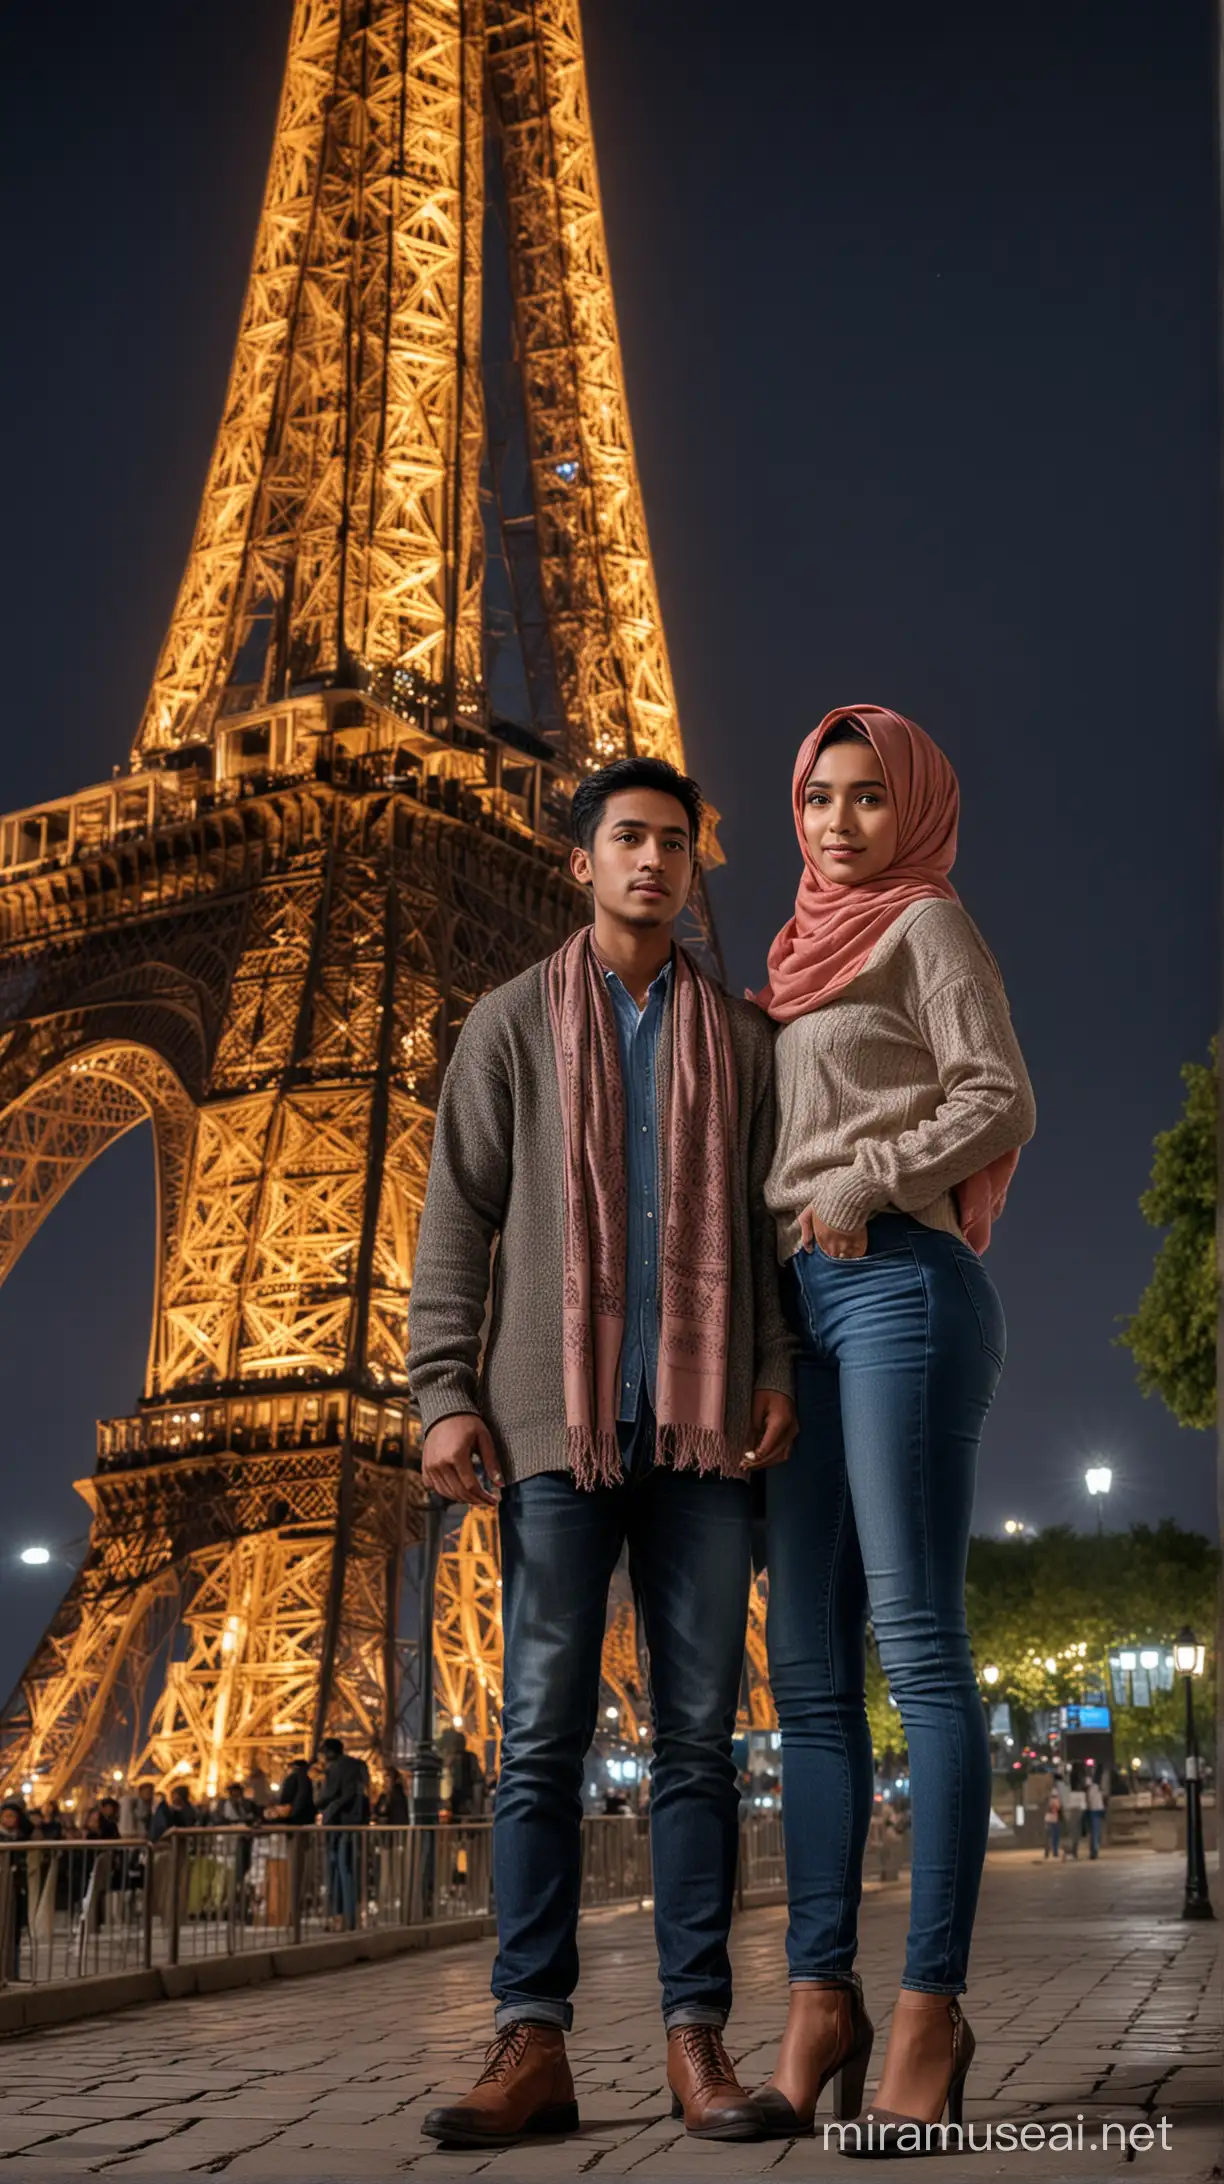 Indonesian Couple in Hijab and Sweater Under Eiffel Tower at Night